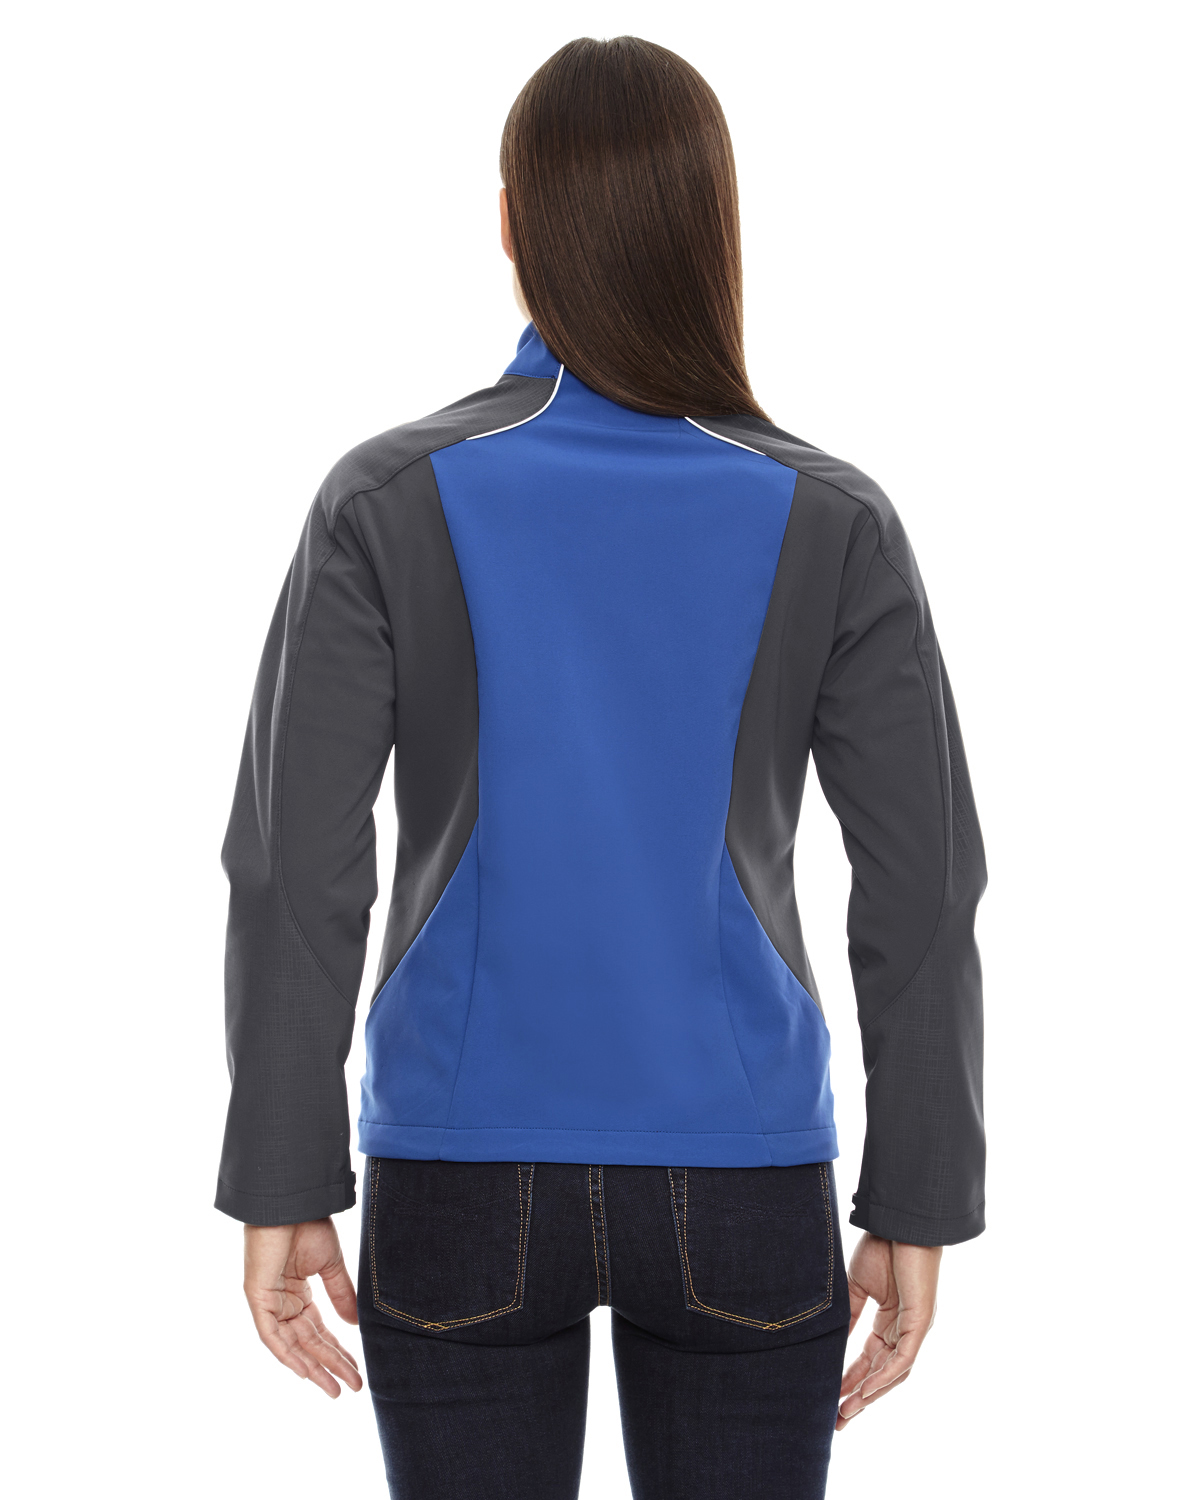 The Ash City - North End Ladies' Terrain Colorblock Soft Shell with Embossed Print - NAUTICL BLUE 413 - S - image 2 of 2